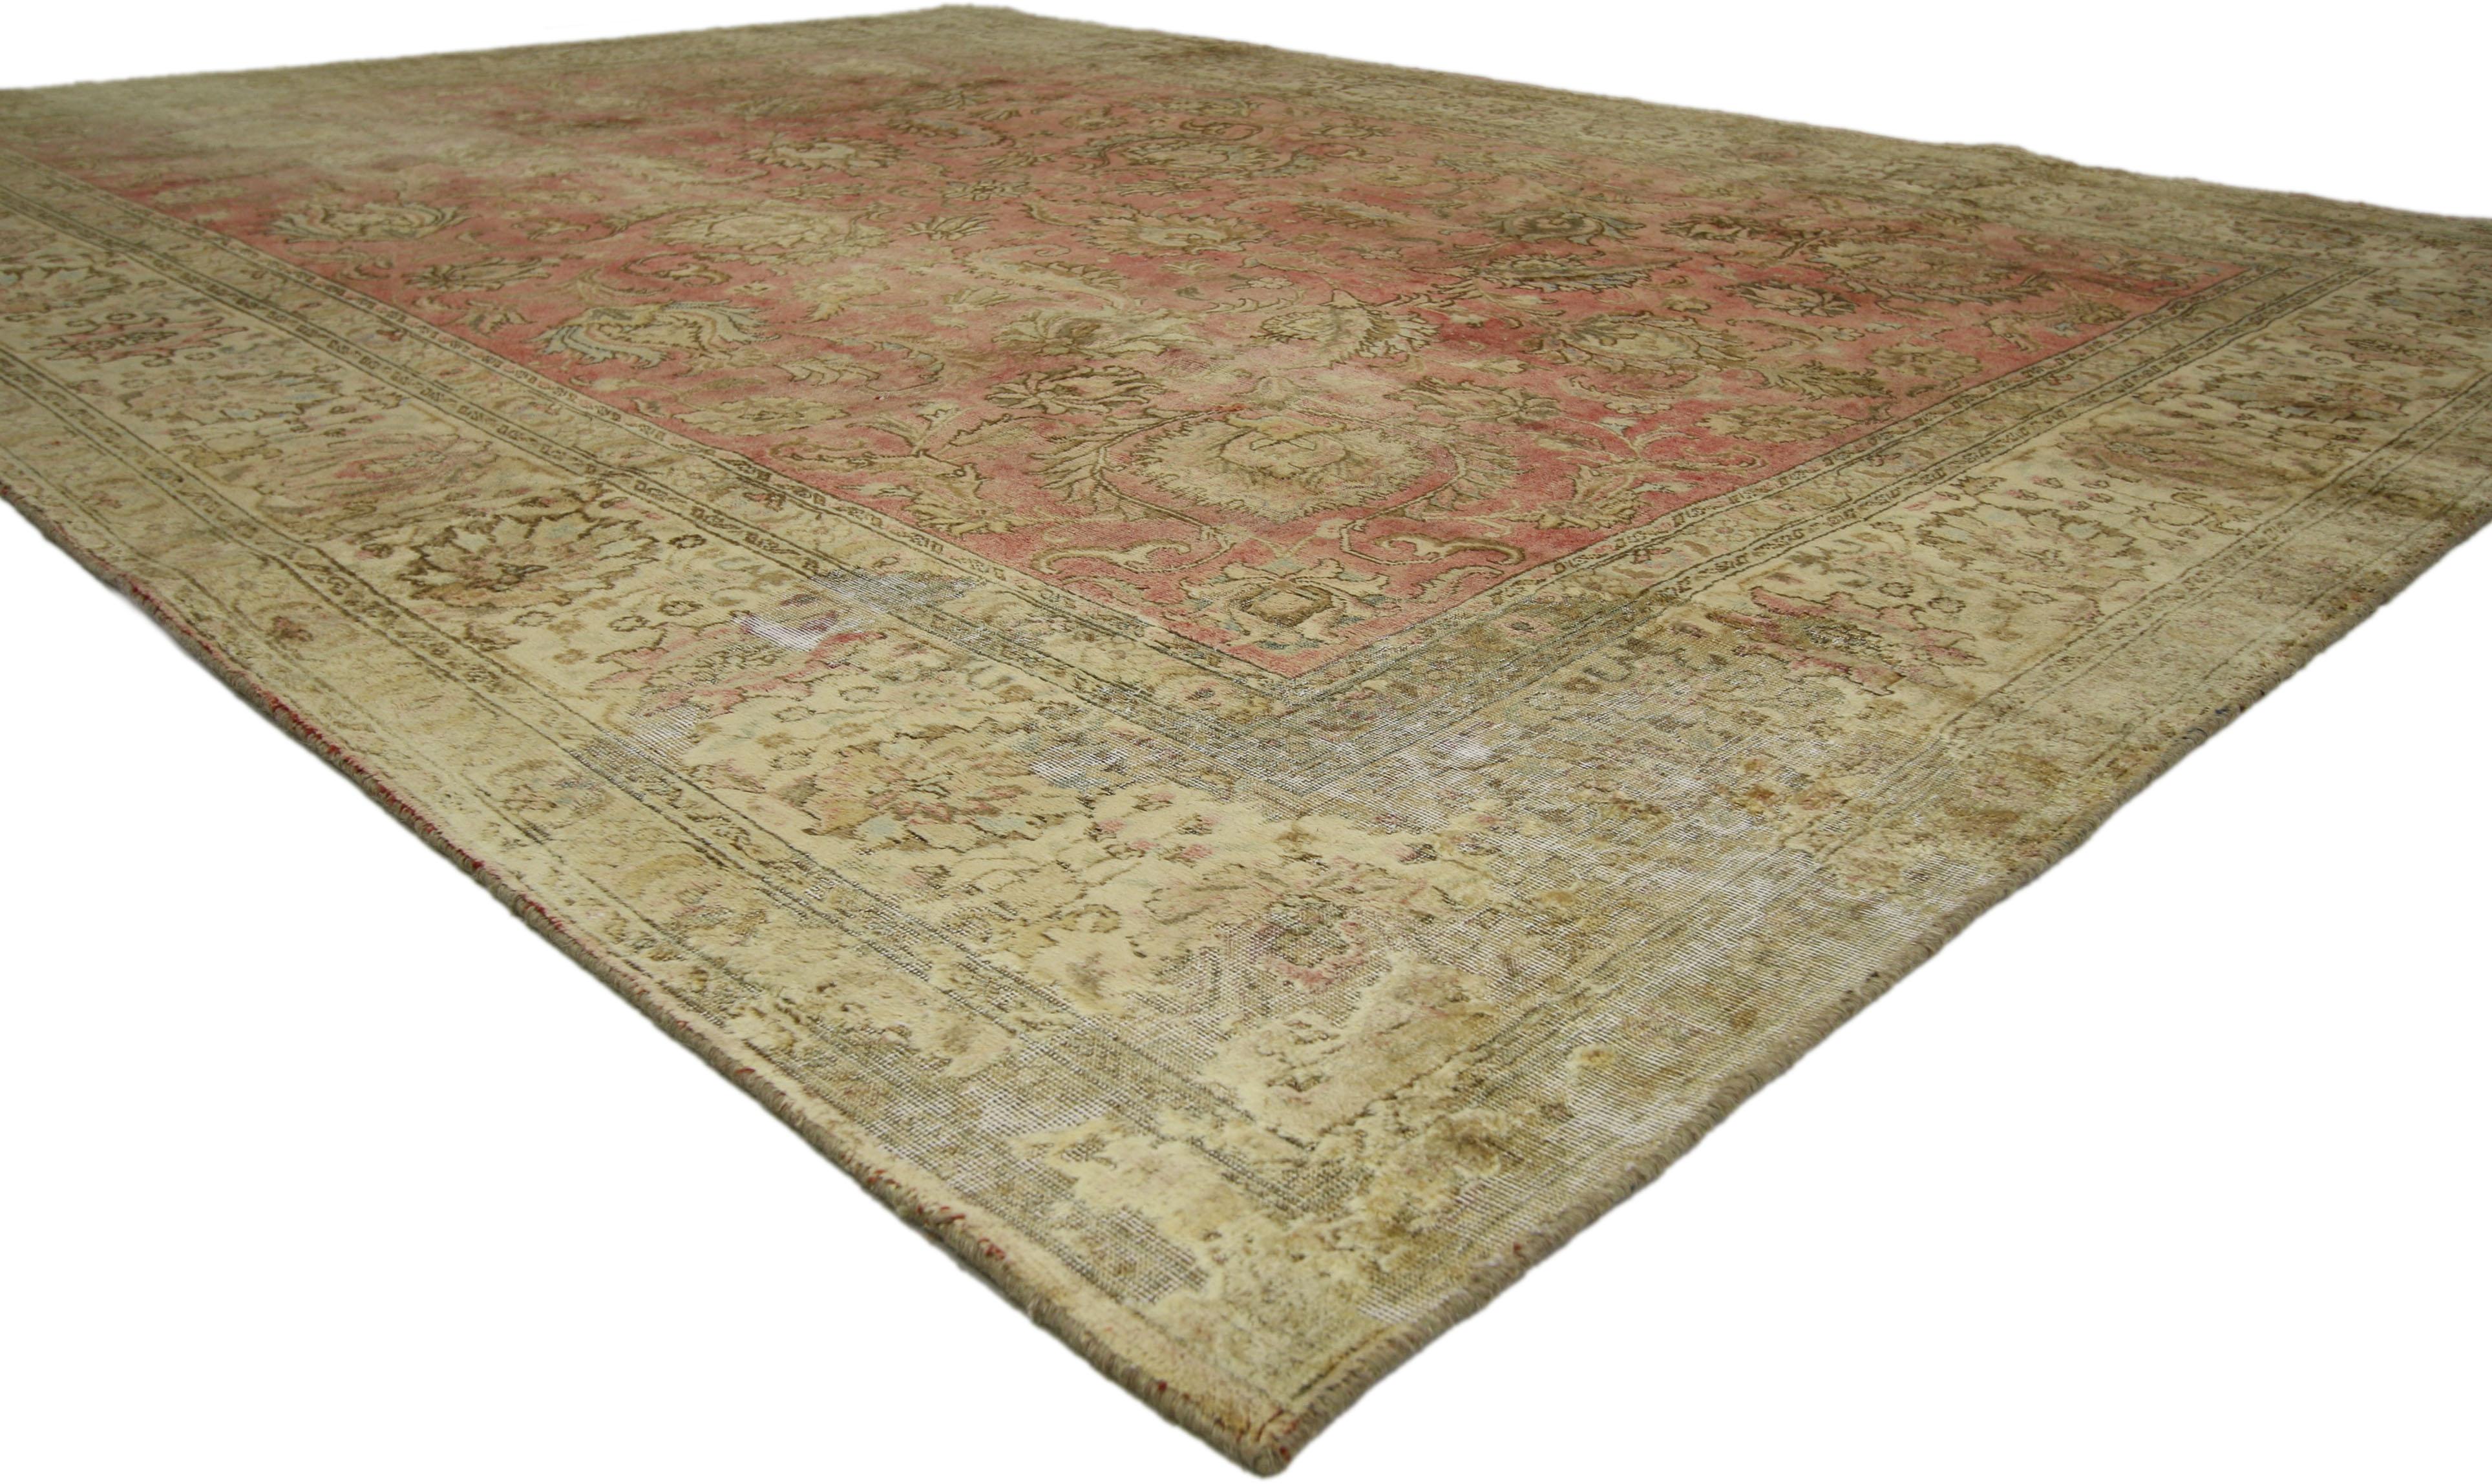 Distressed Antique Persian Tabriz Rug Industrial Rustic Style For Sale 1